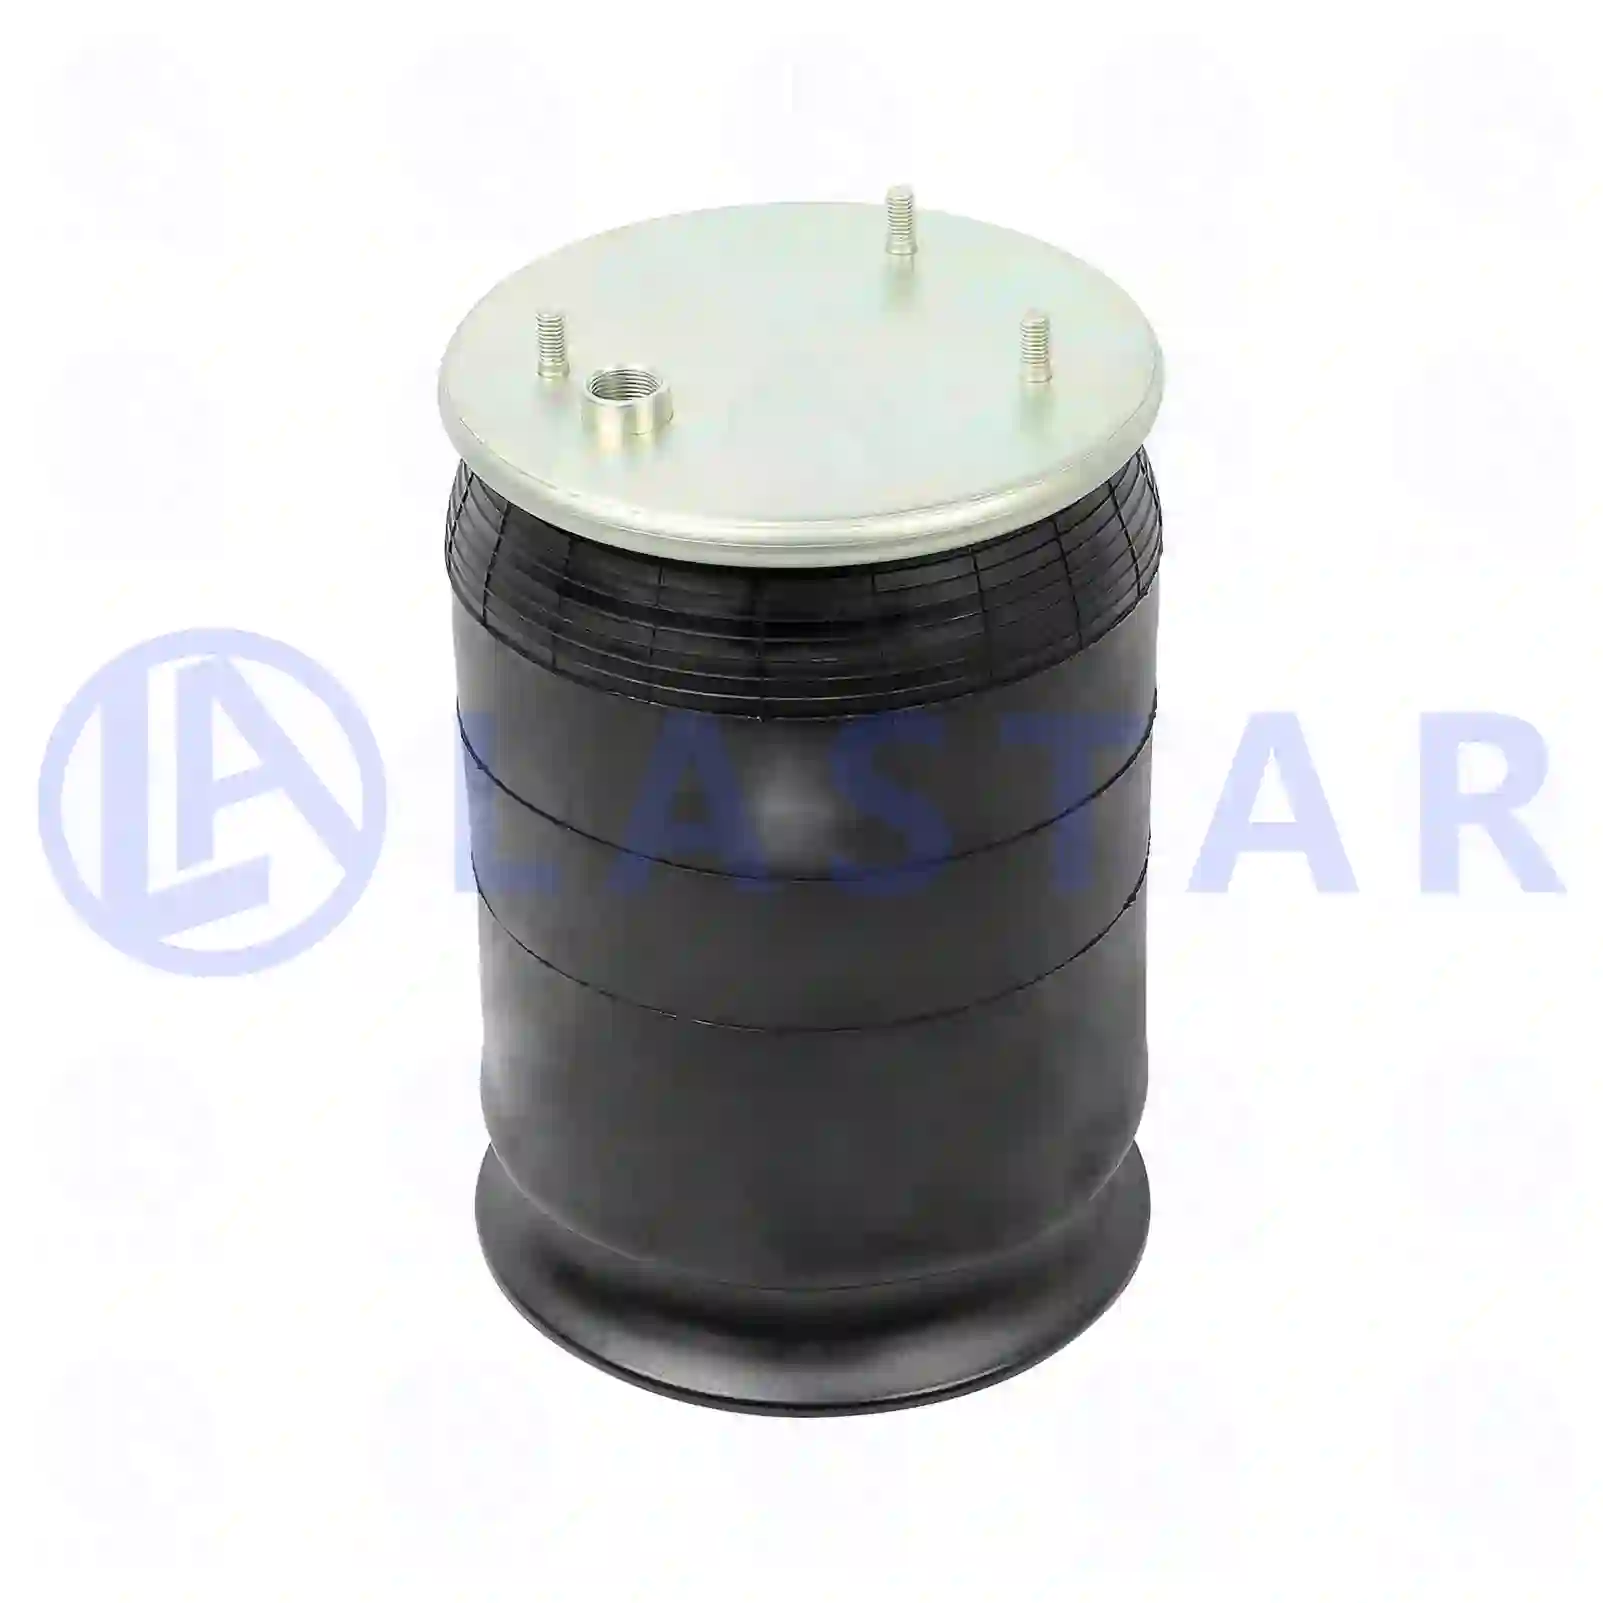 Air spring, with plastic piston, 77728517, 1793526, ZG40724-0008 ||  77728517 Lastar Spare Part | Truck Spare Parts, Auotomotive Spare Parts Air spring, with plastic piston, 77728517, 1793526, ZG40724-0008 ||  77728517 Lastar Spare Part | Truck Spare Parts, Auotomotive Spare Parts